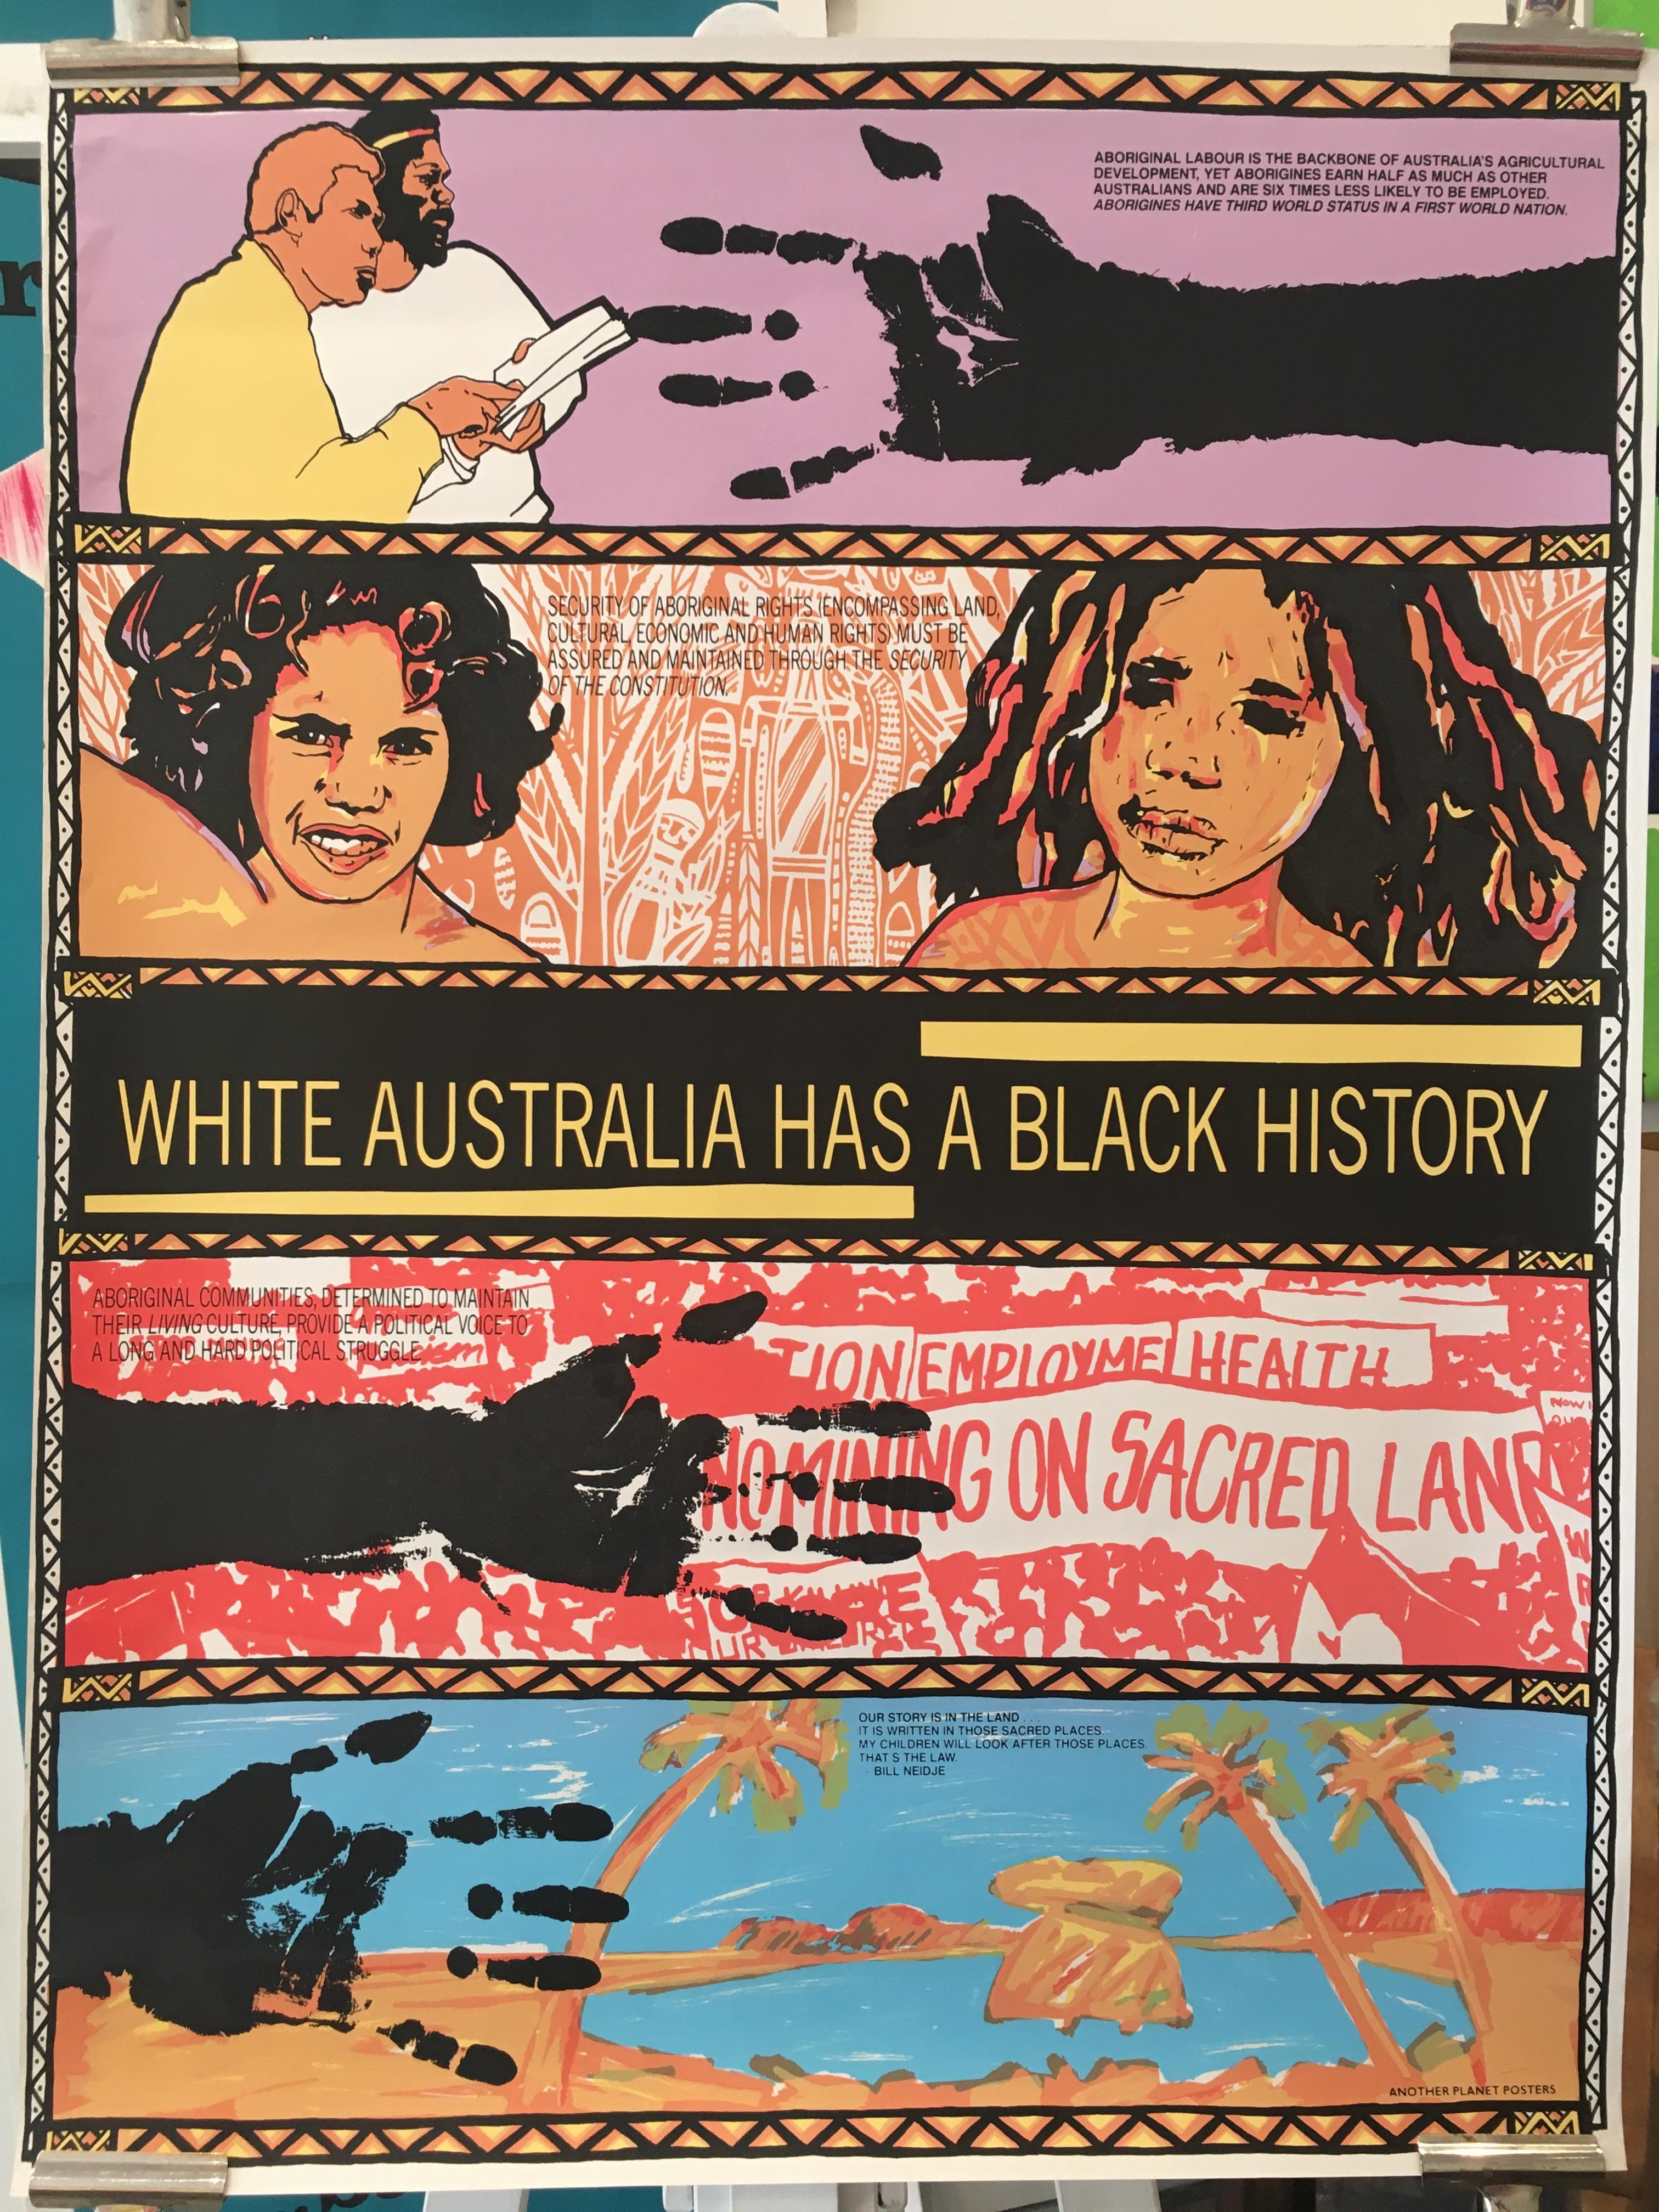 'White Australia Has A Black History' by Australian artist Colin Russel, 1987

Colin Russel is an Australian artist who designed a series of political posters throughout the mid-1980s, including aboriginal land rights and wage equality.